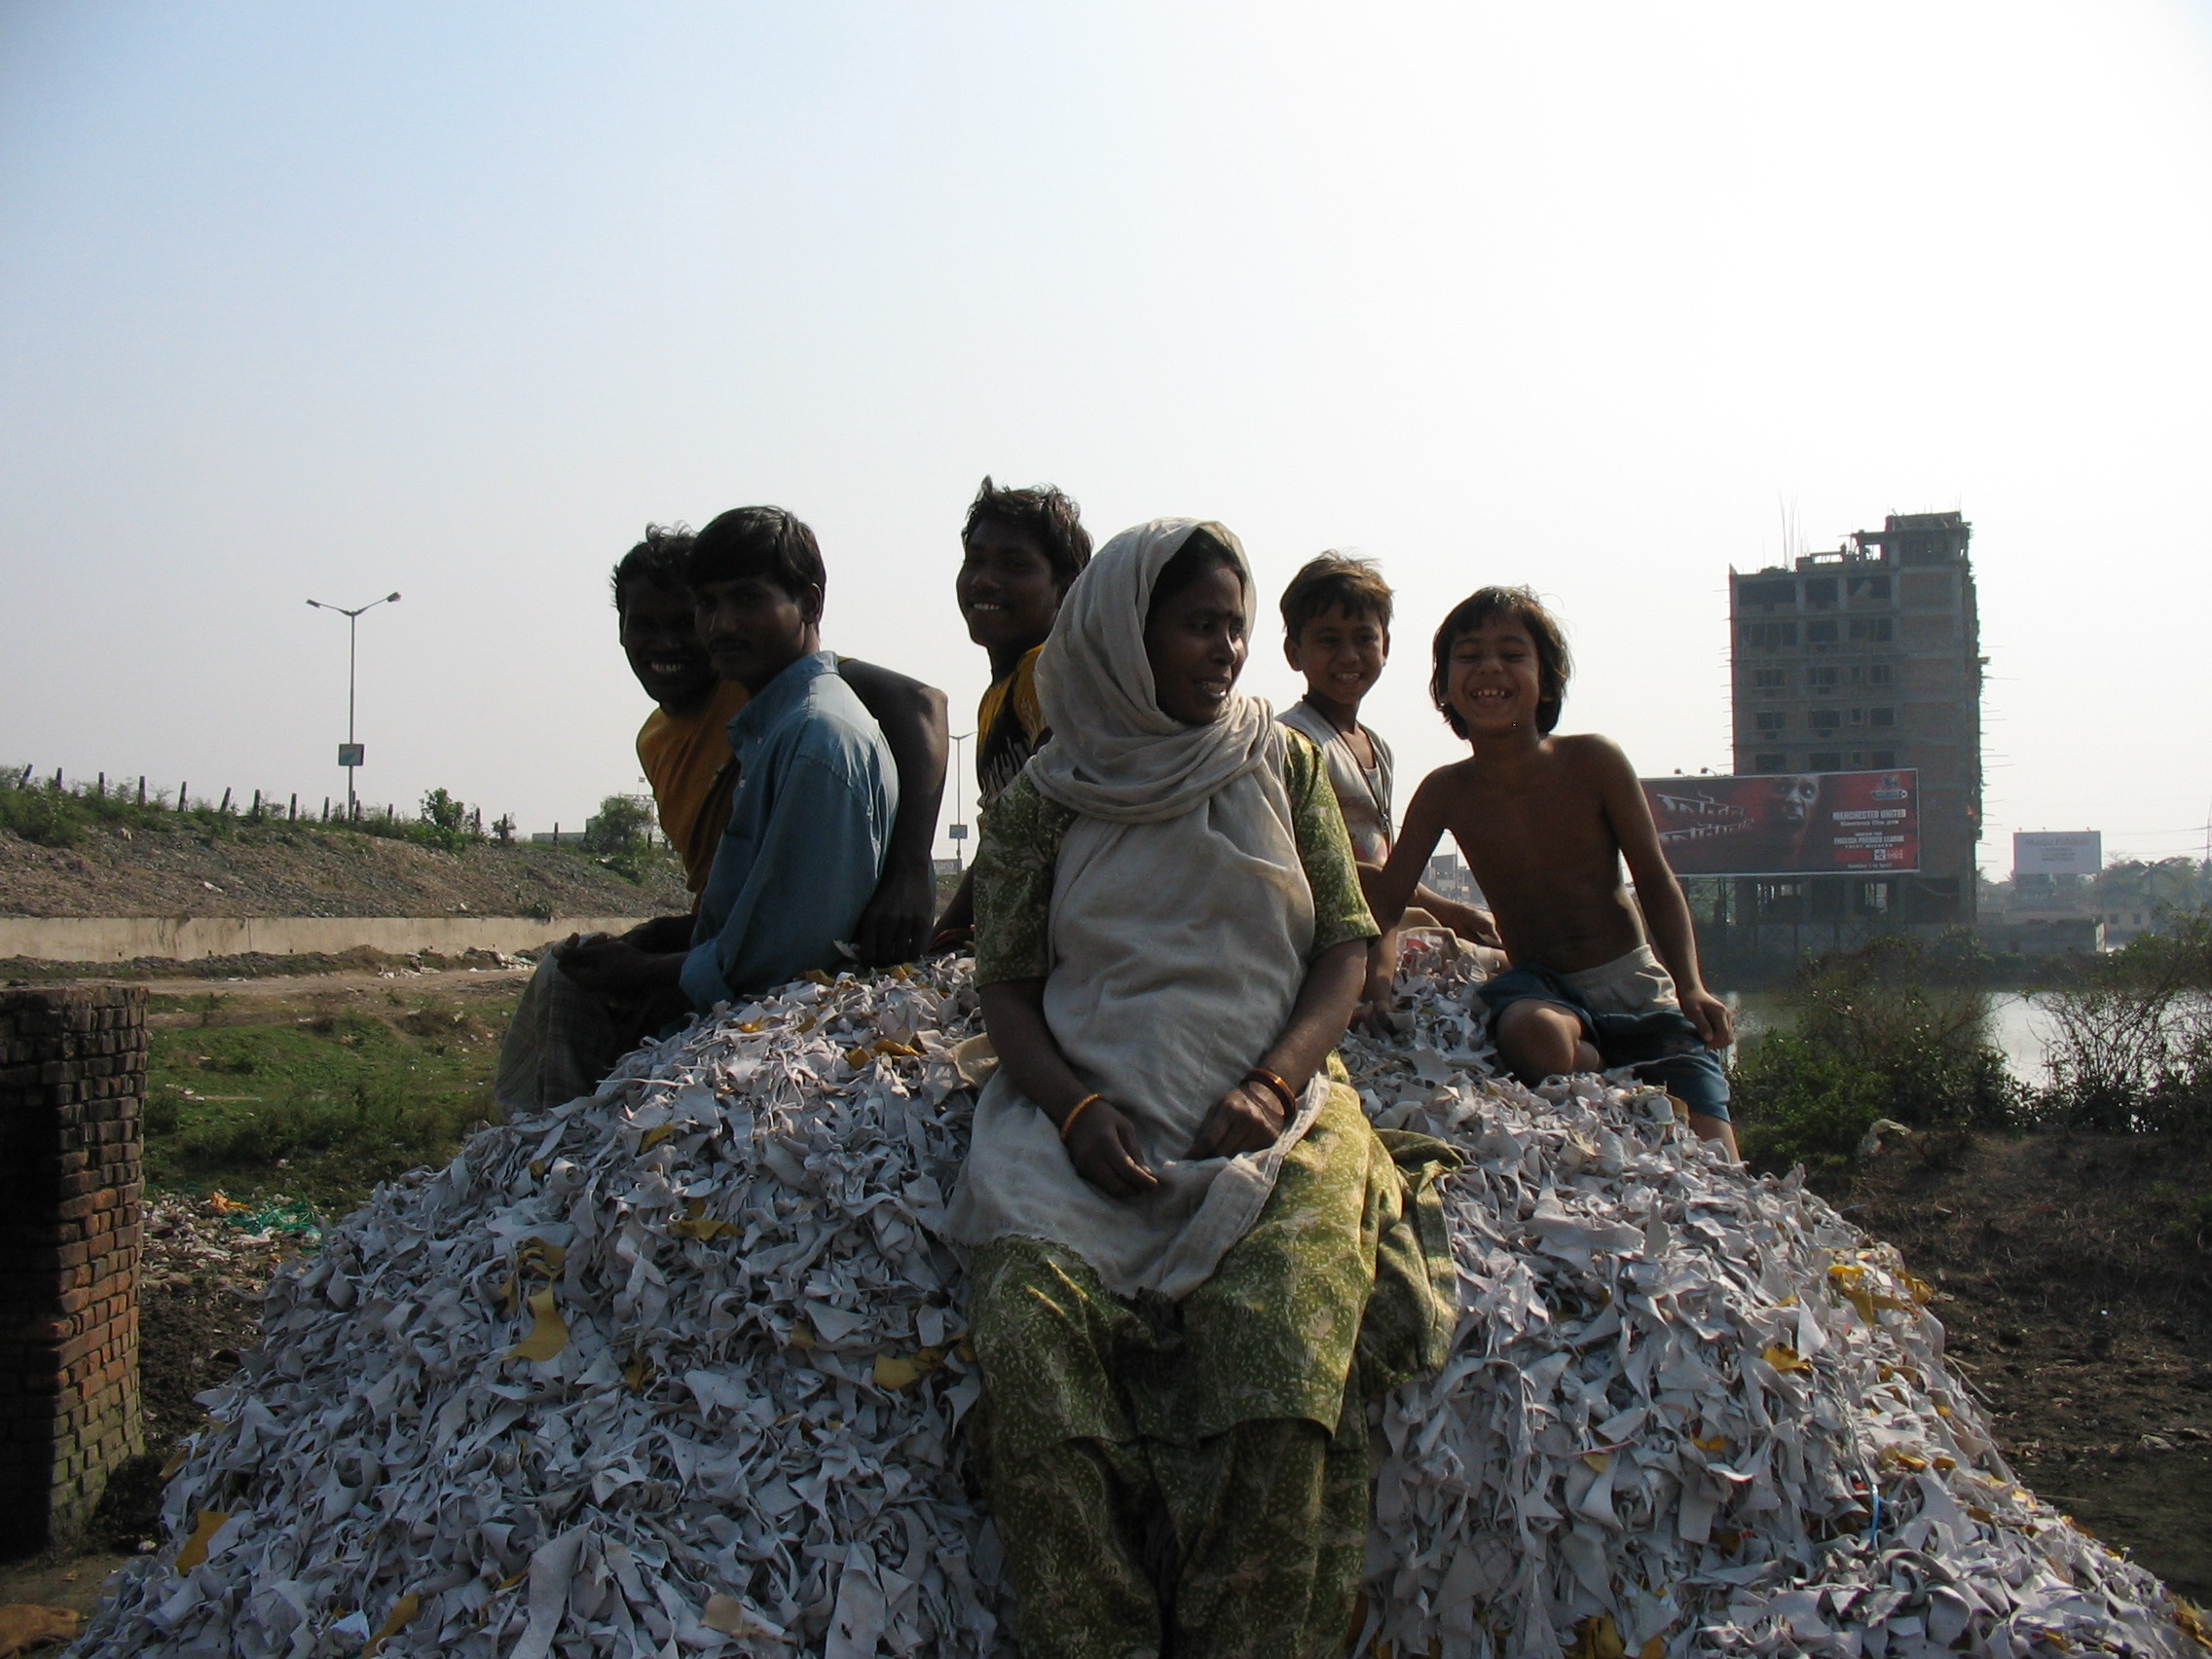 Taking a break from scavenging at a dumpsite in India